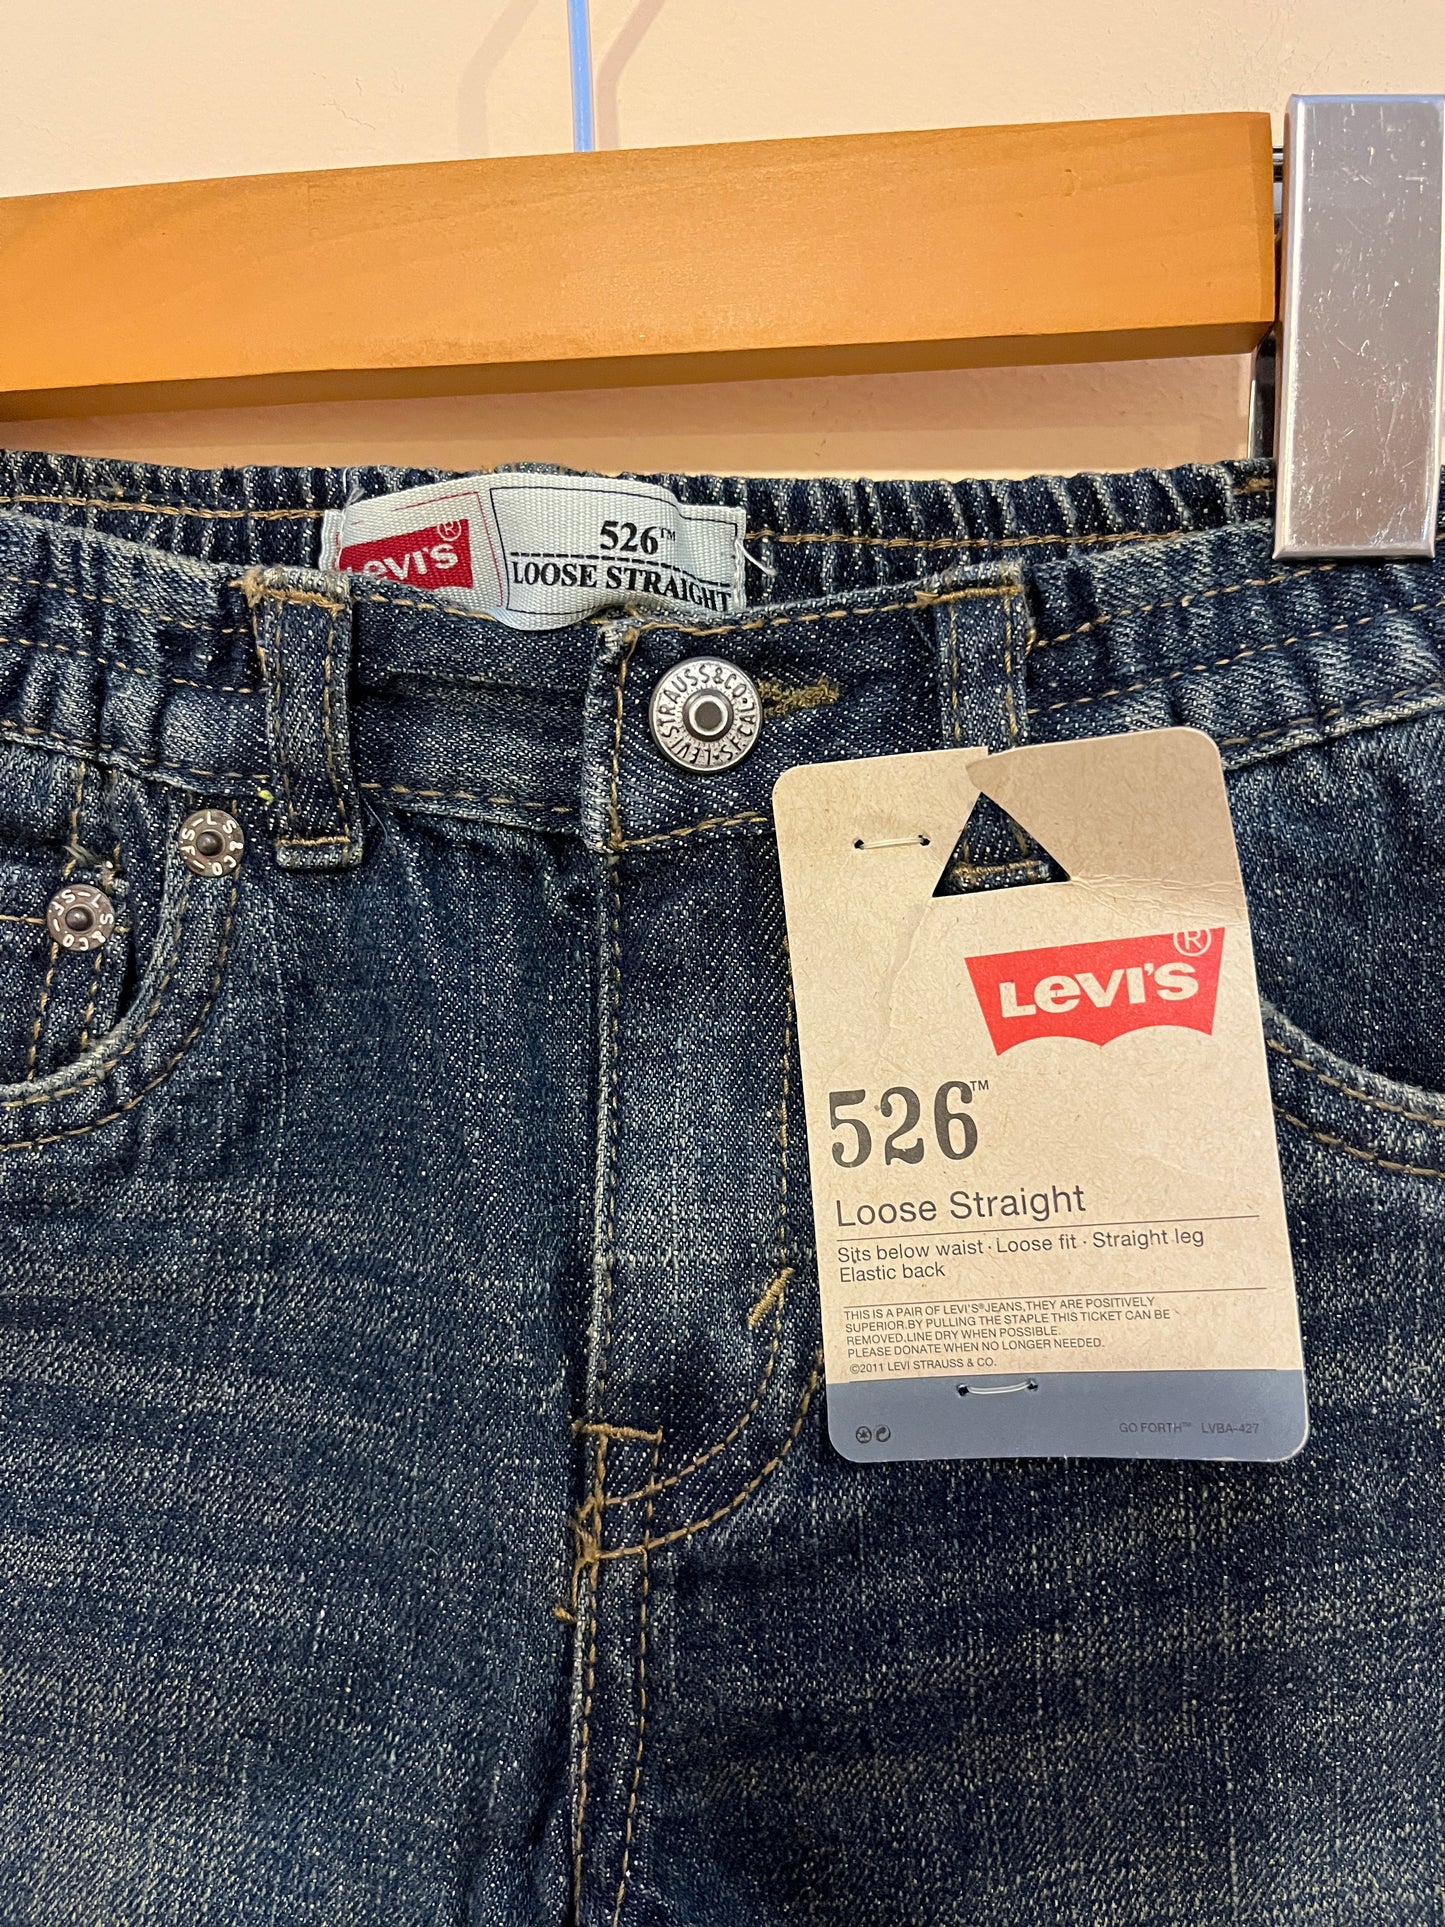 NEW! Levi’s 526 Loose Straight Jeans (24M)*